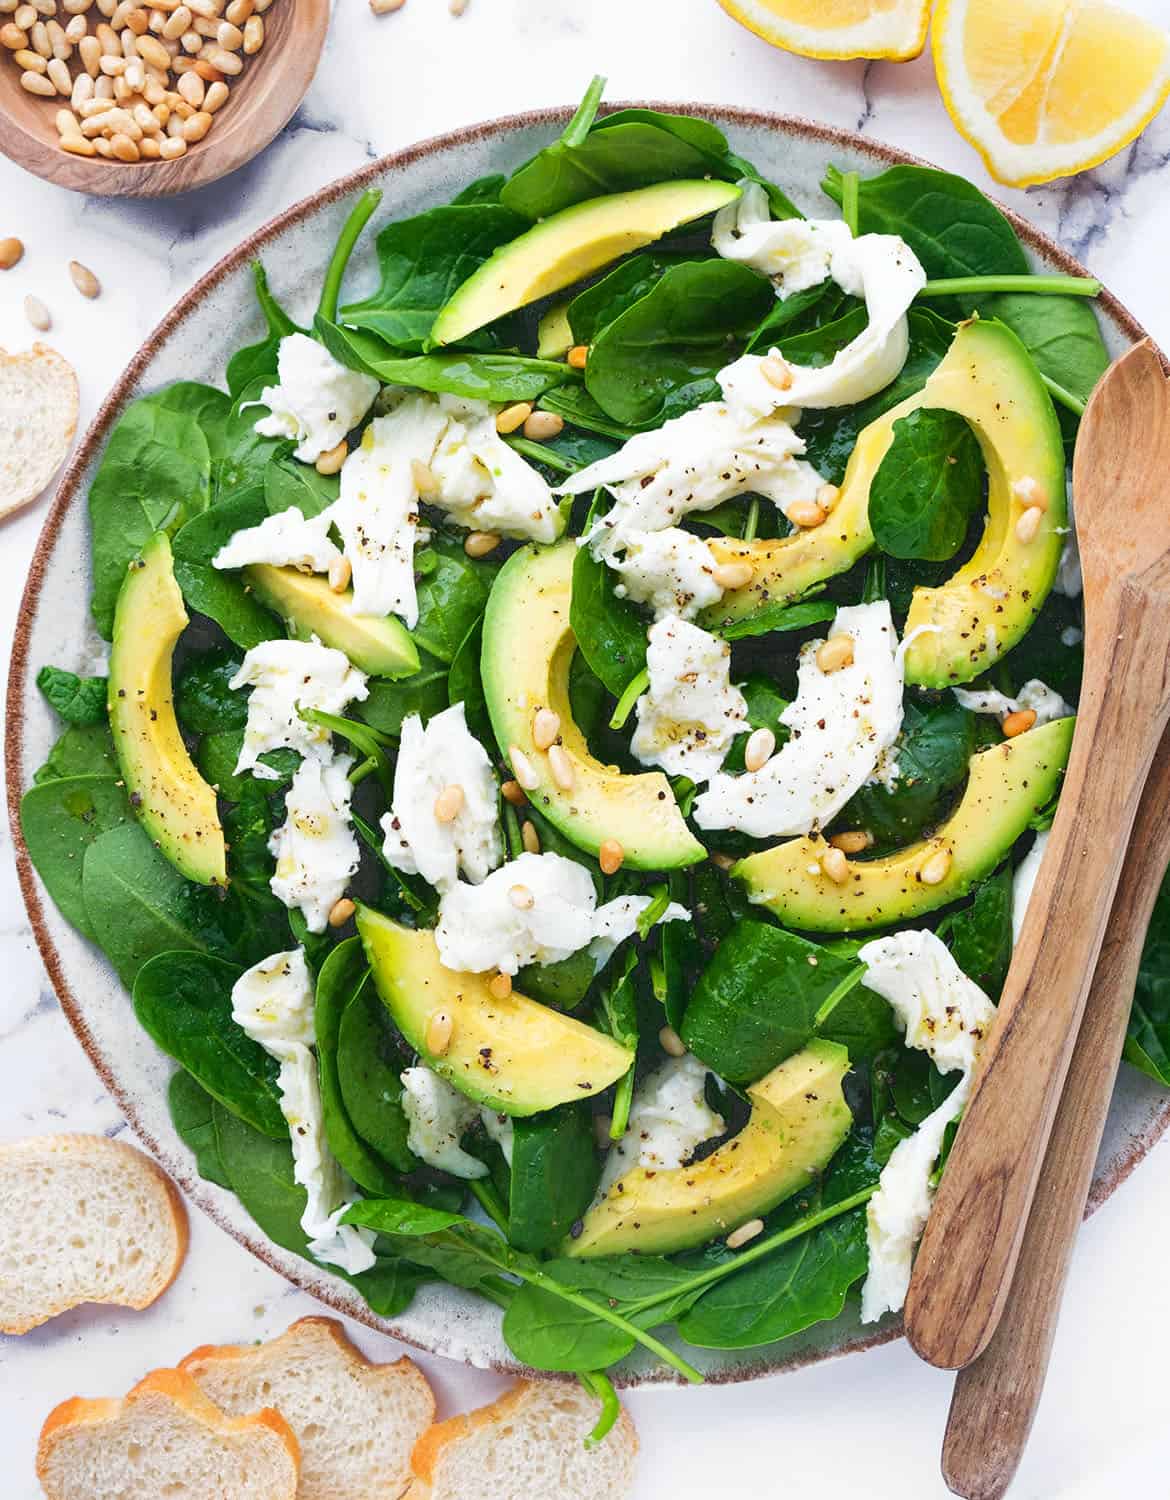 Top view of a serving plate full of spinach avocado salad with mozzarella.